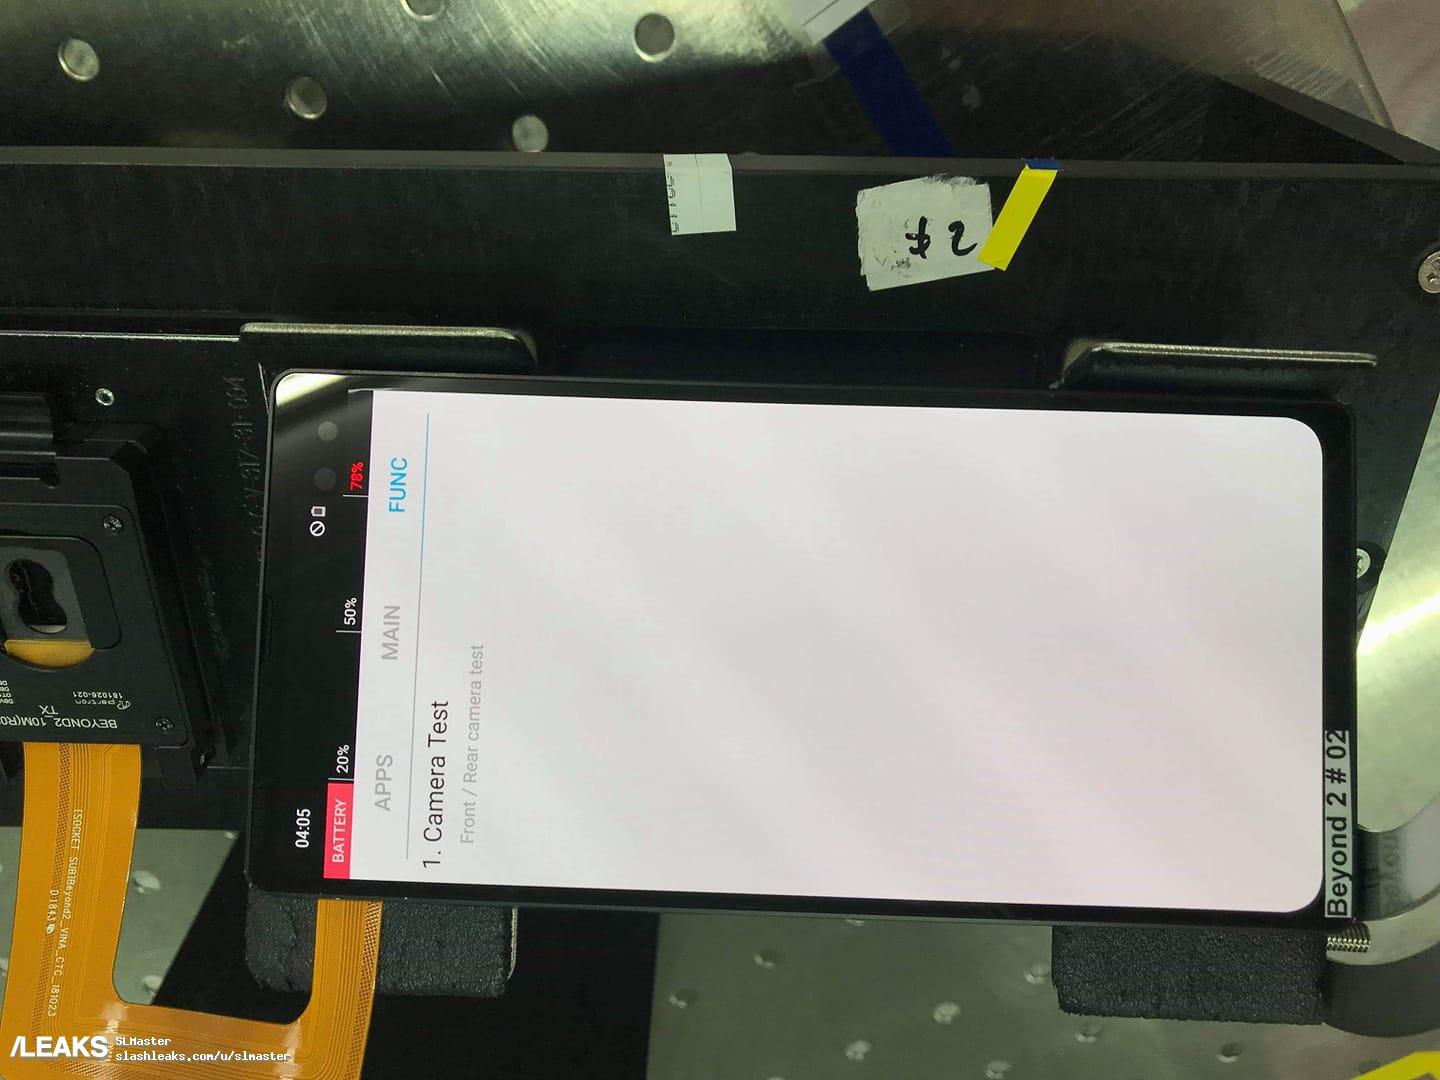 s10 beyond 2 with anti leak film is being tested at samsung factory